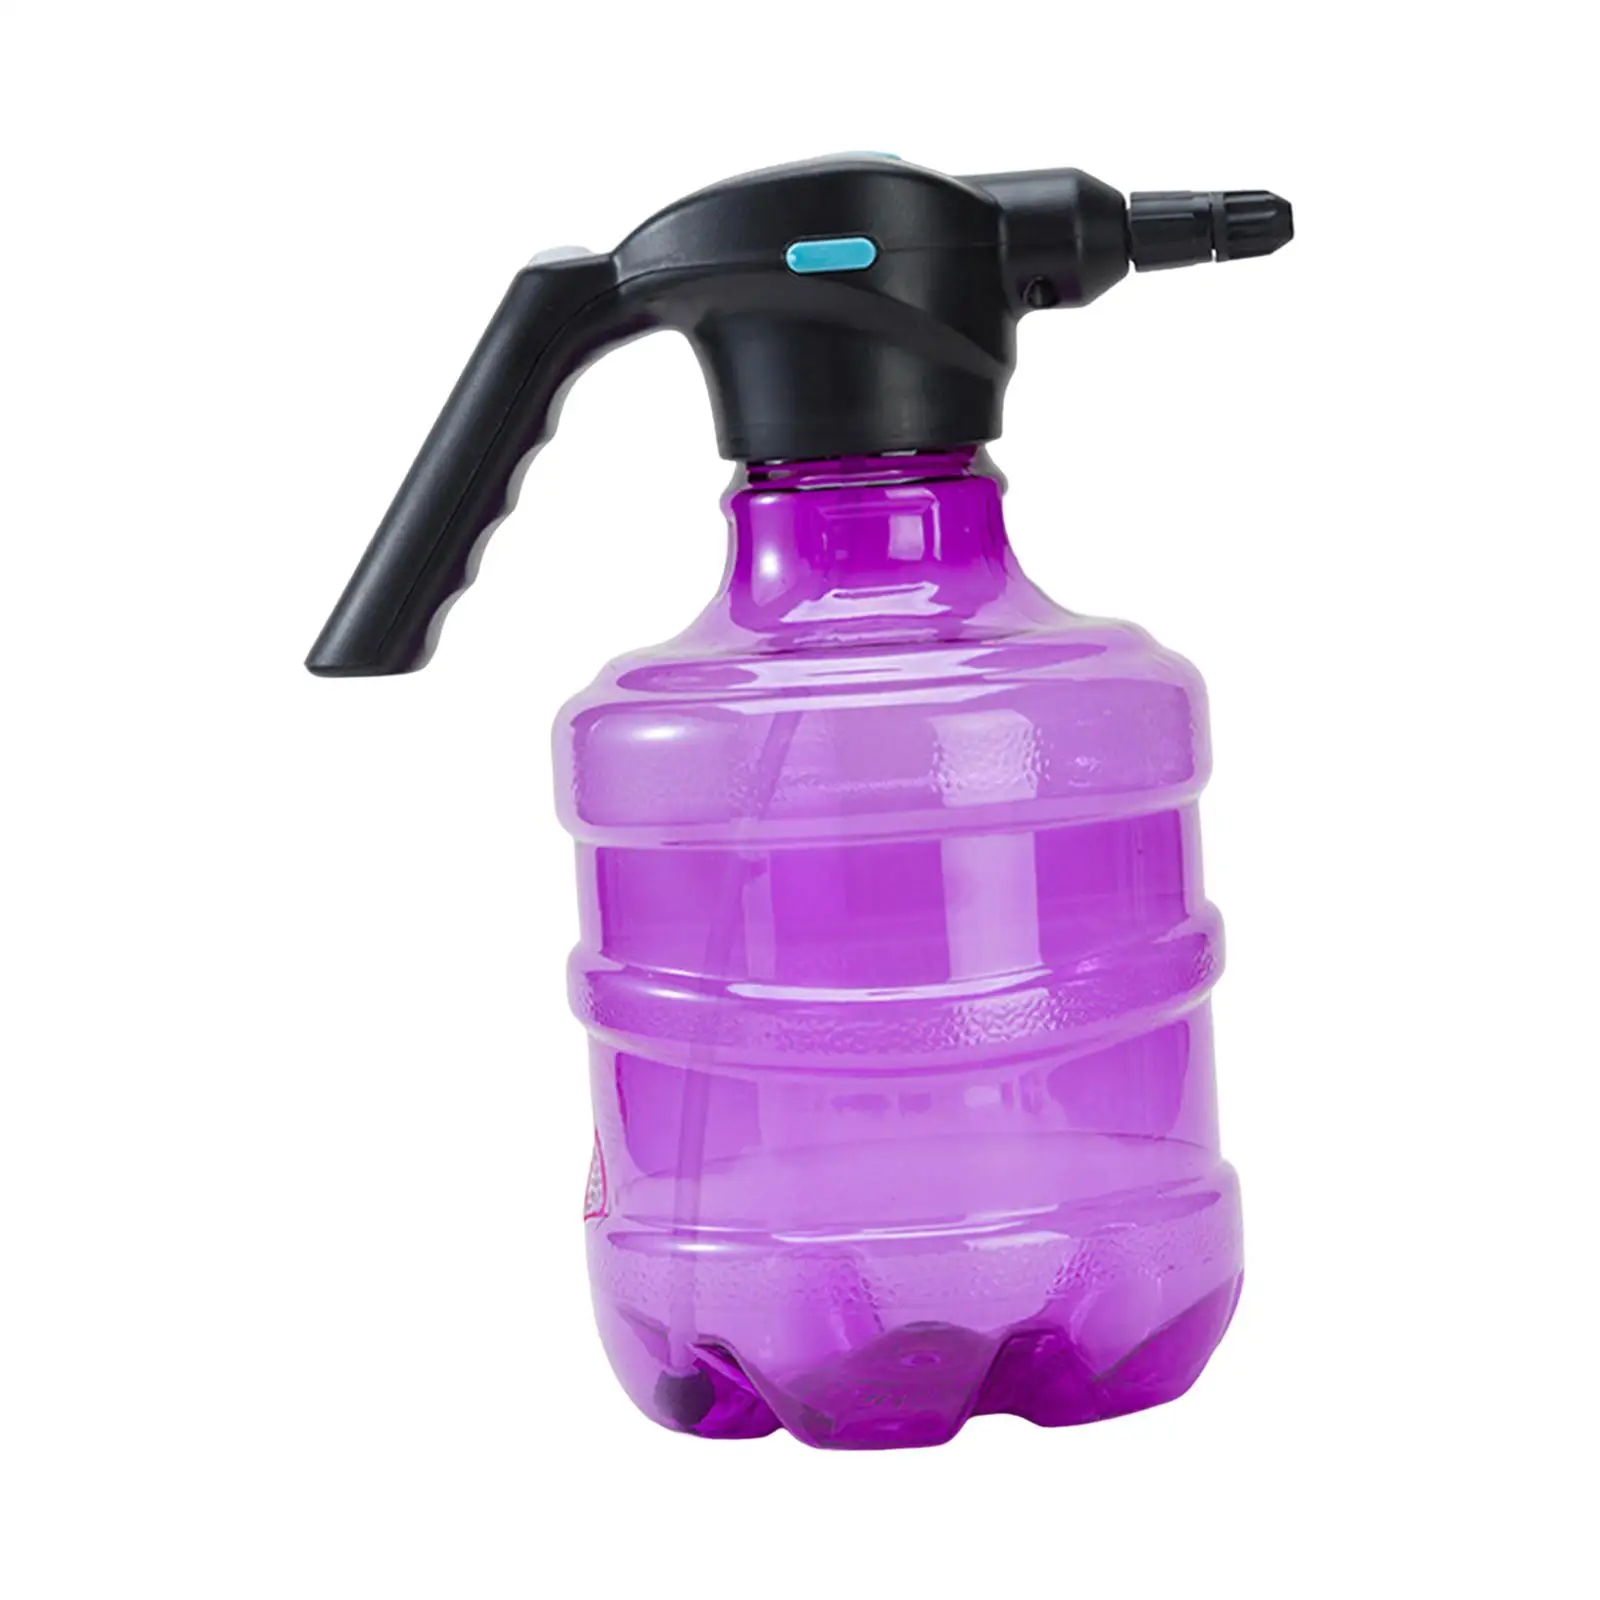 Electric Spray Bottle with Adjustable Spout Automatic 3L Capacity Multi Use Indoor Watering Plants for Household Cleaning